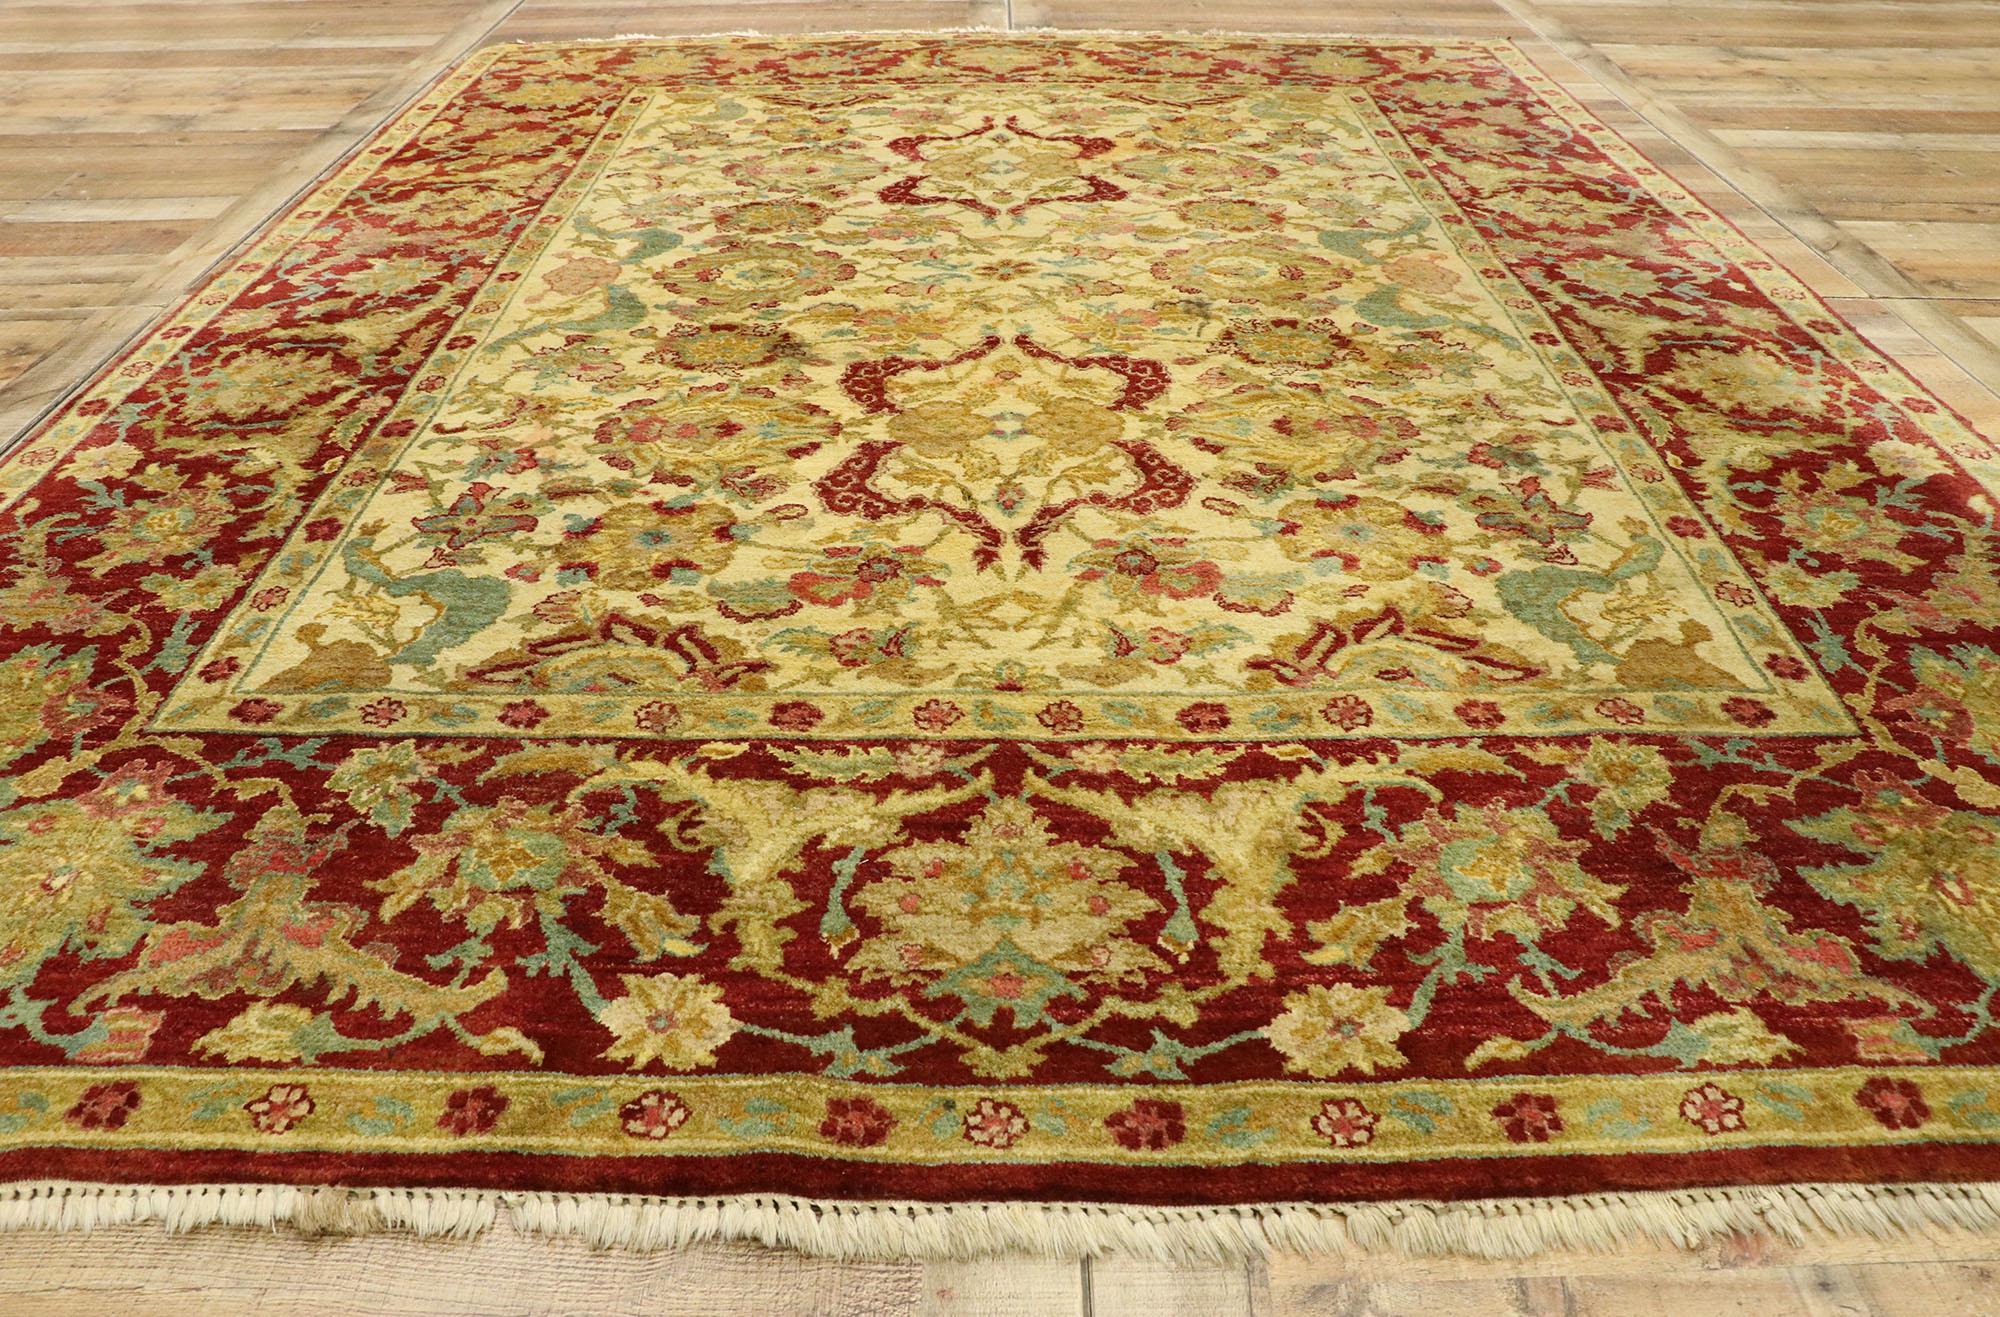 Vintage Indian Rug with Arts & Crafts Style Inspired by William Morris In Good Condition For Sale In Dallas, TX